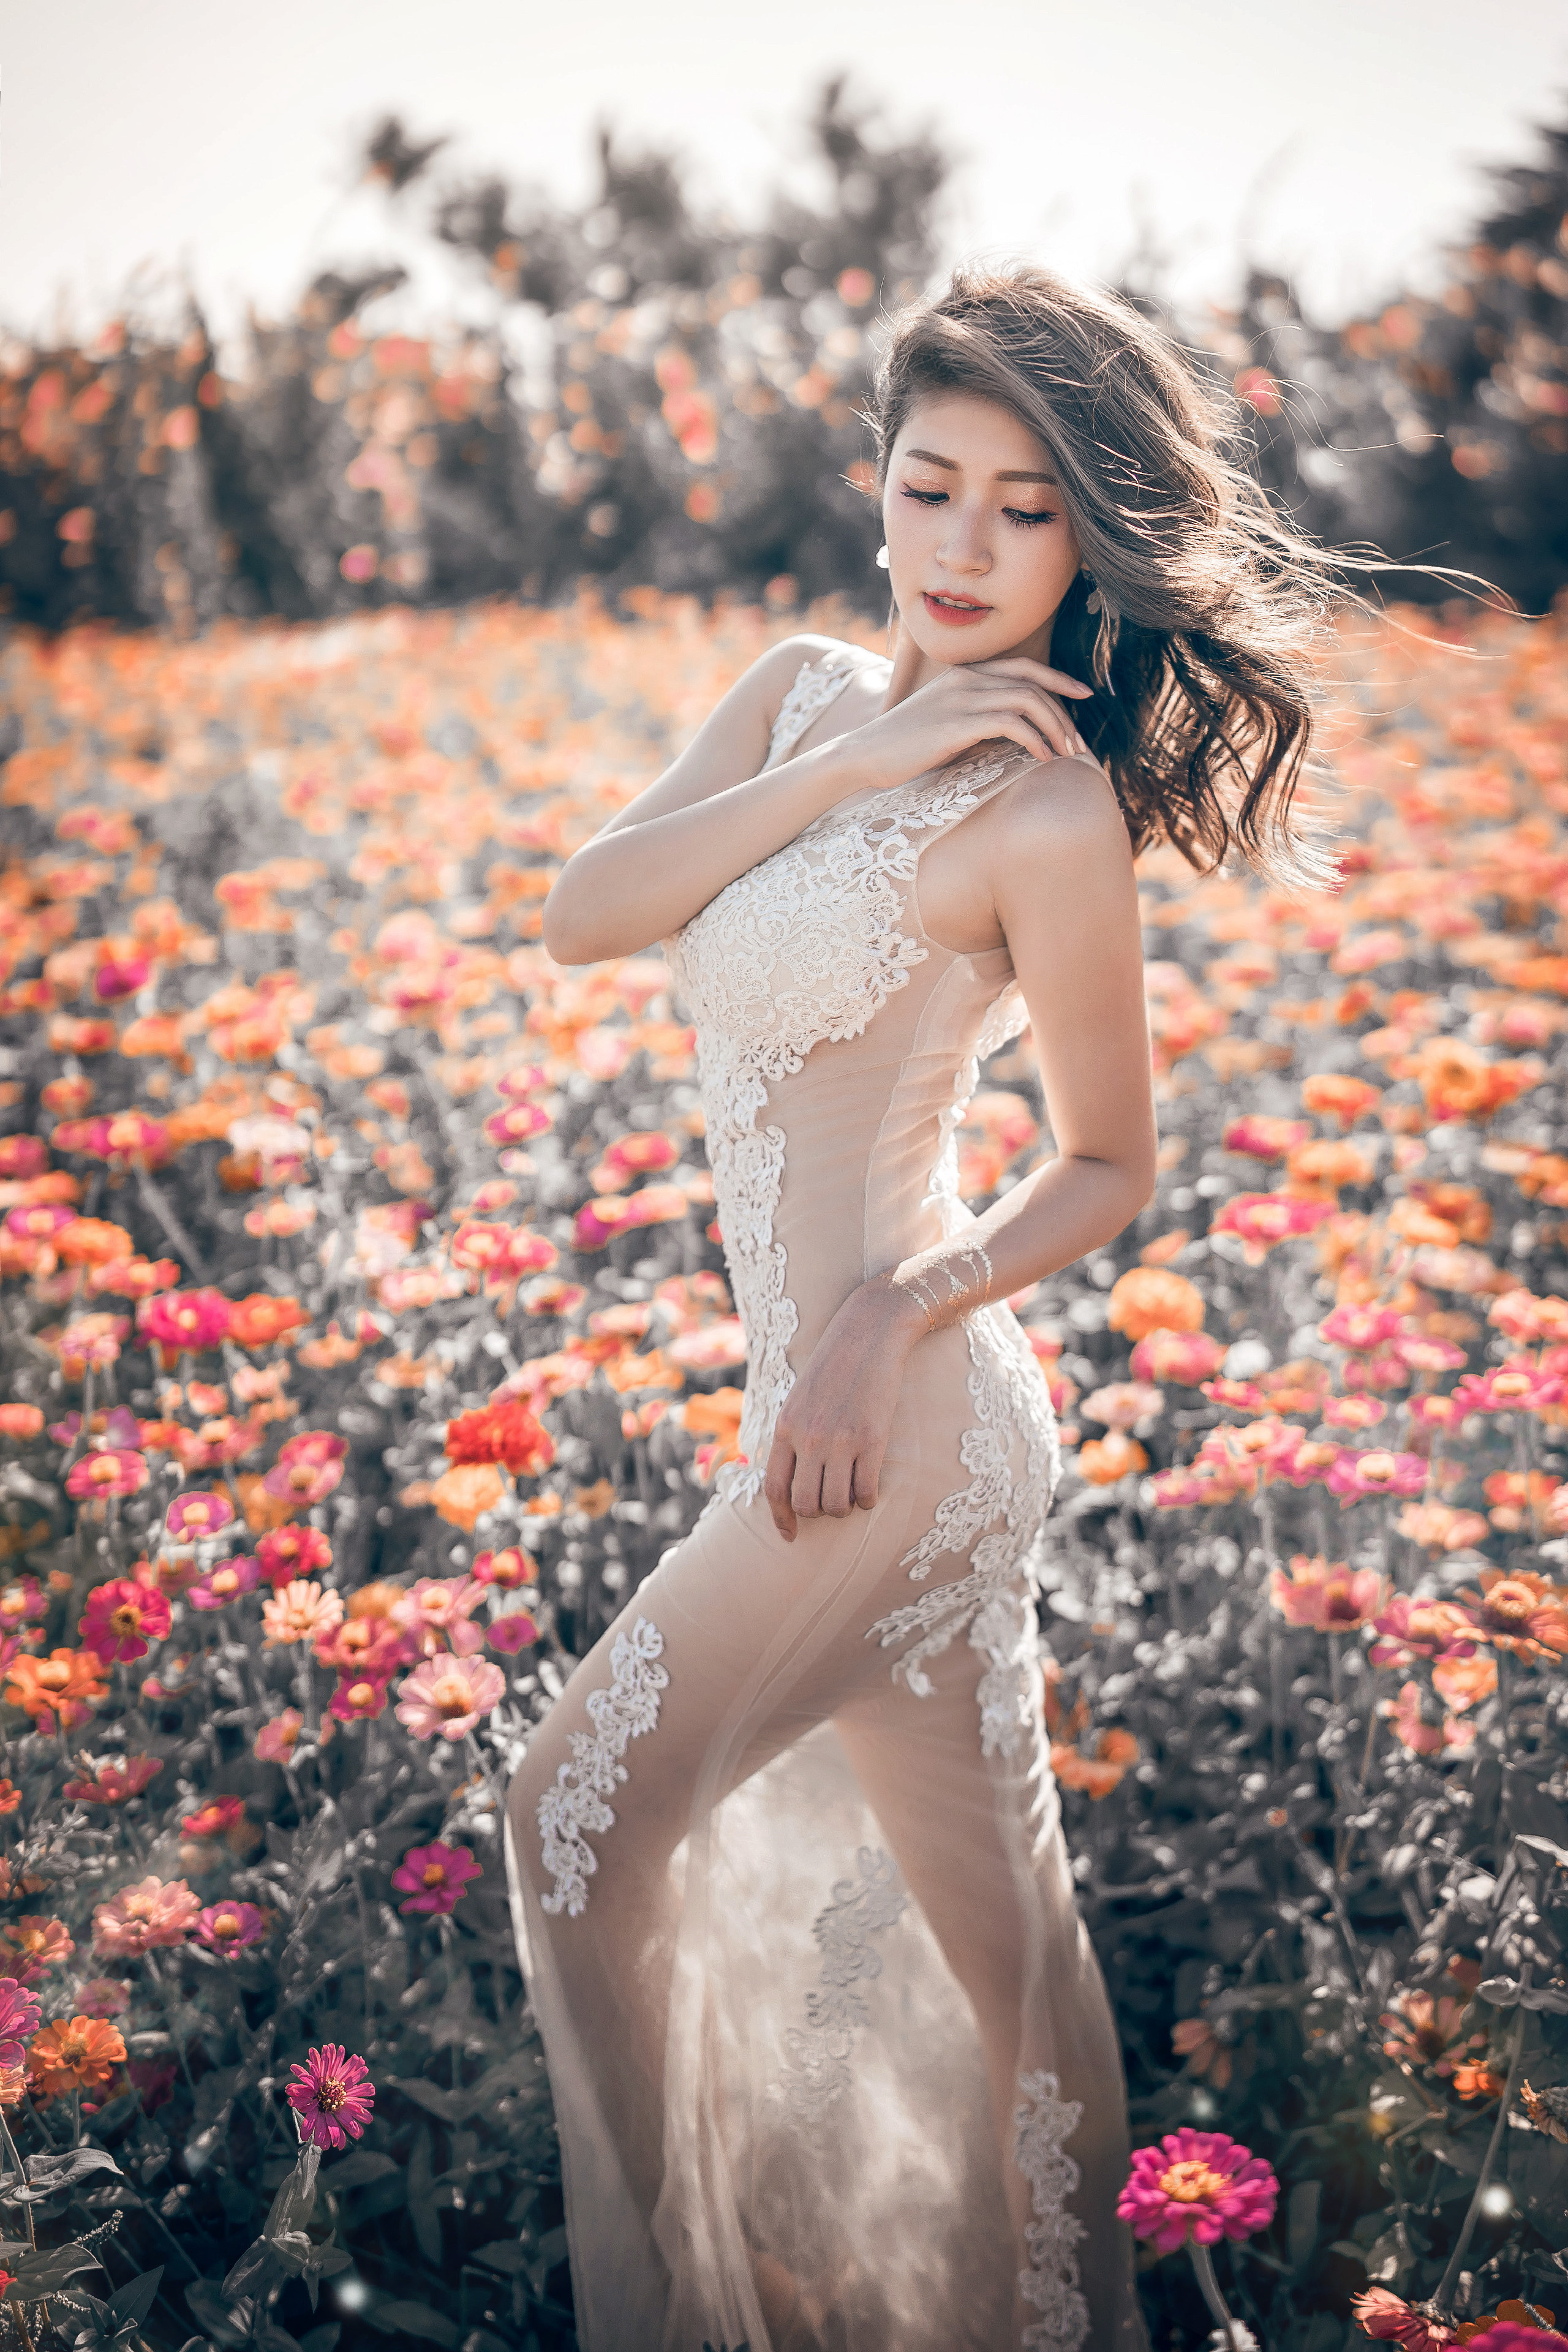 People 2560x3840 women Asian flowers plants women outdoors Chinese see-through dress pale long hair legs ass arched back